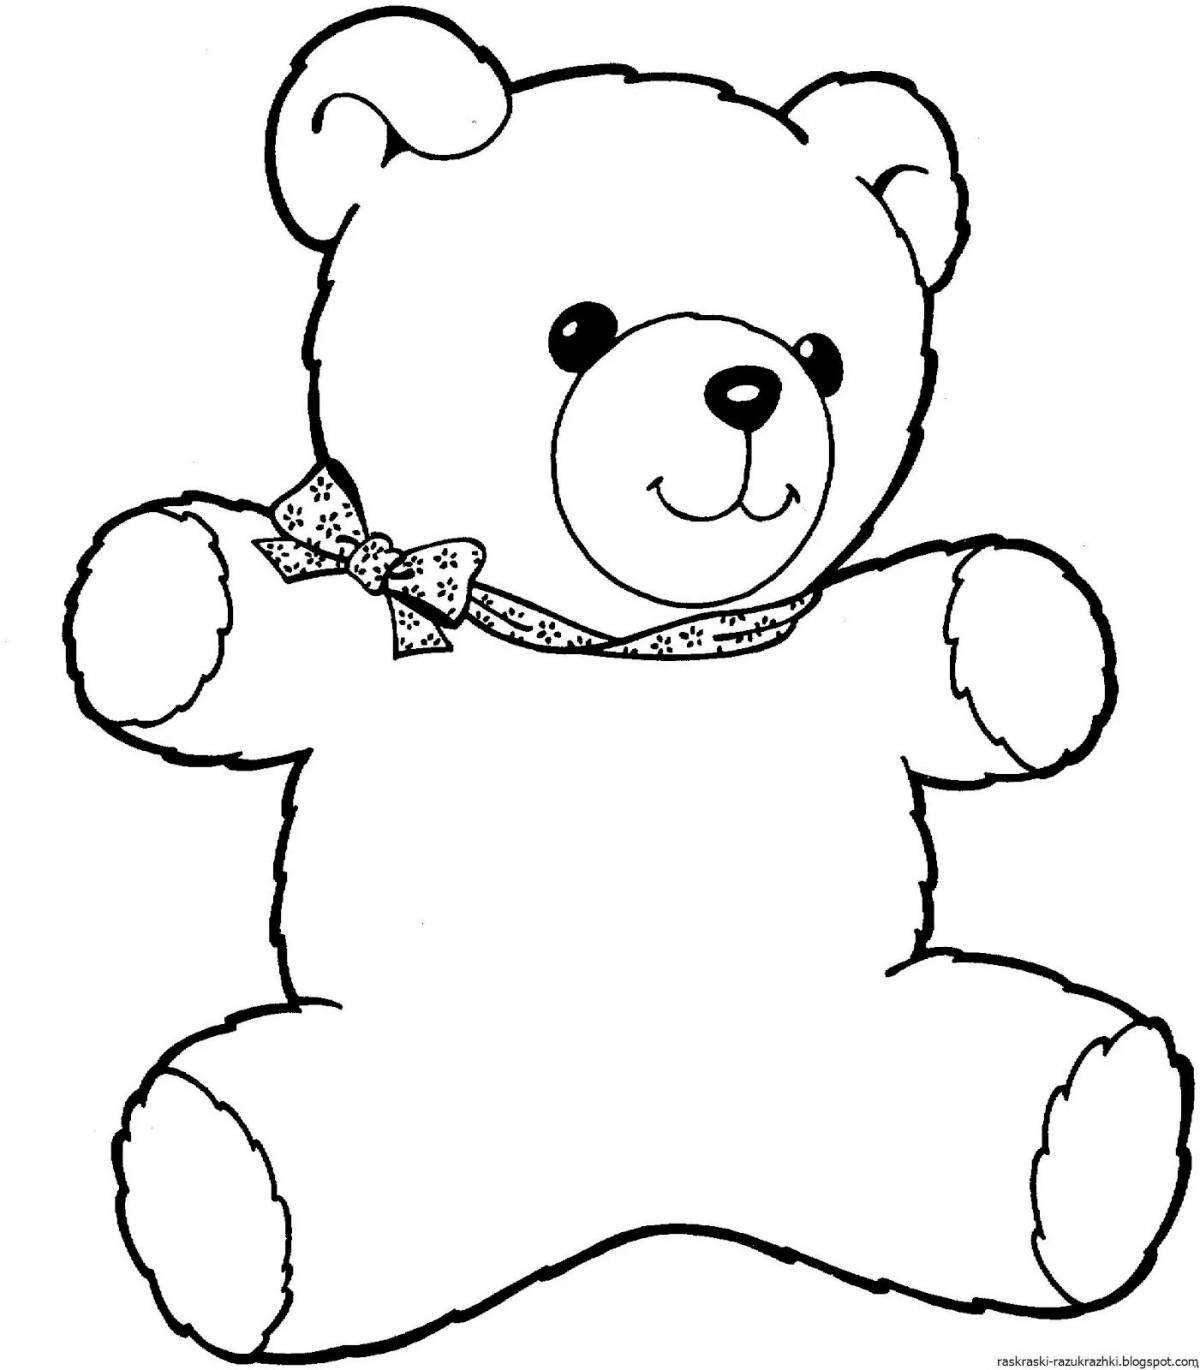 Coloring book funny bear for children 2-3 years old